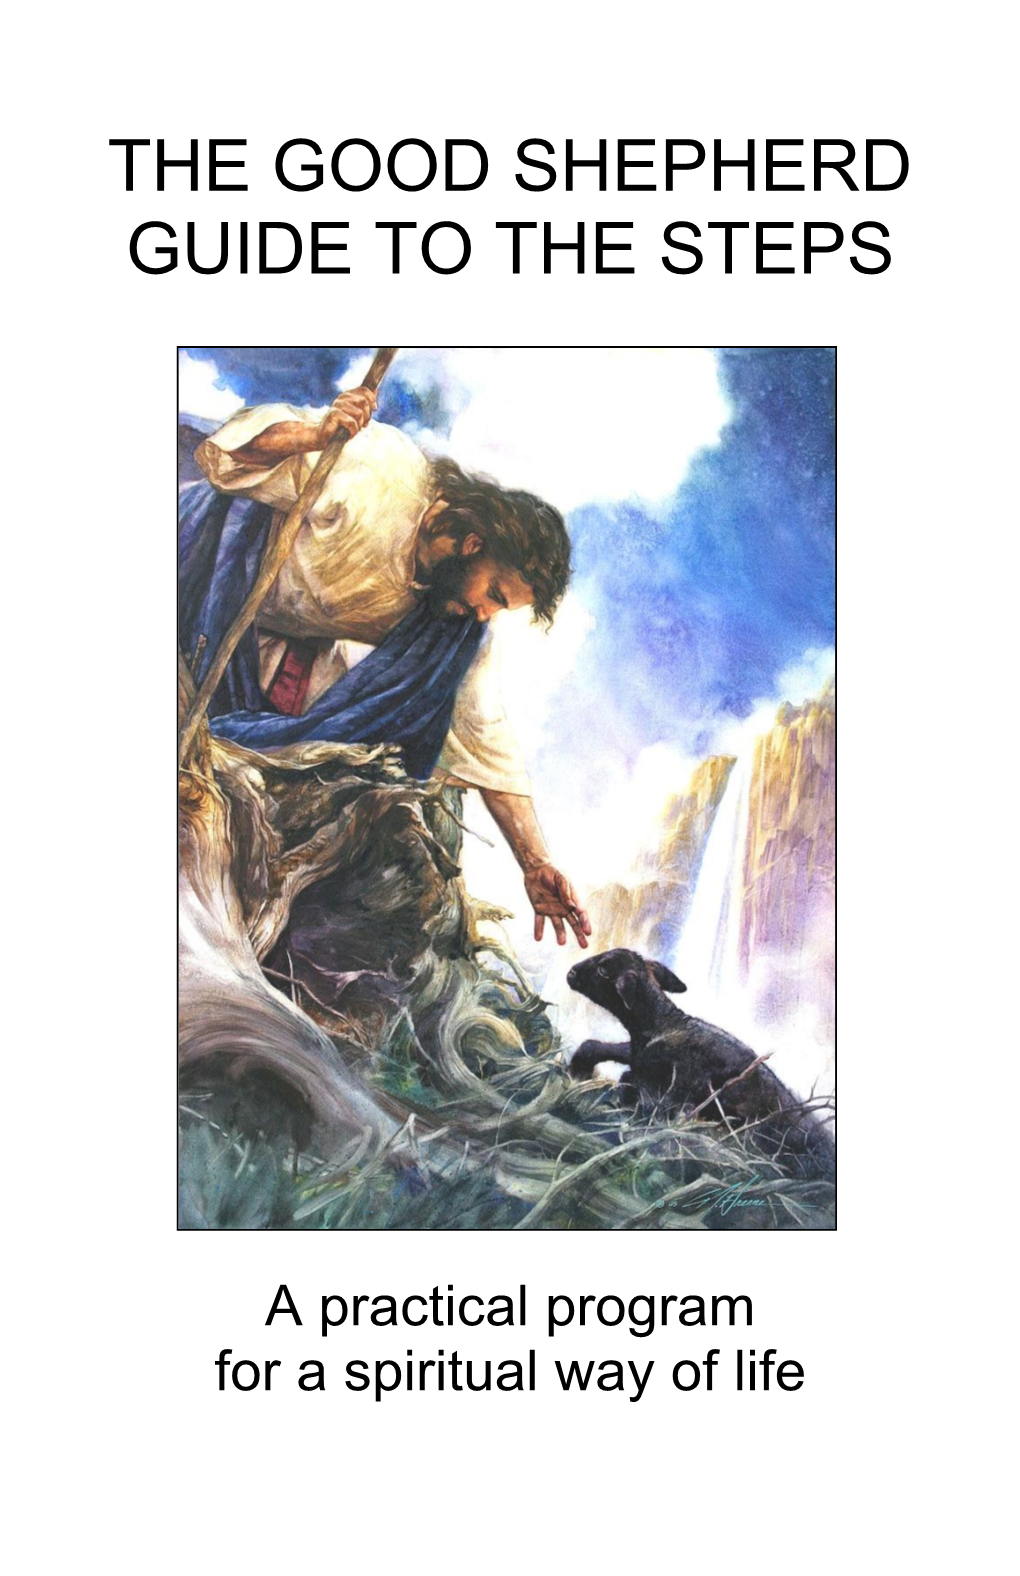 The Good Shepherd Guide to the Steps (Pdf) Download